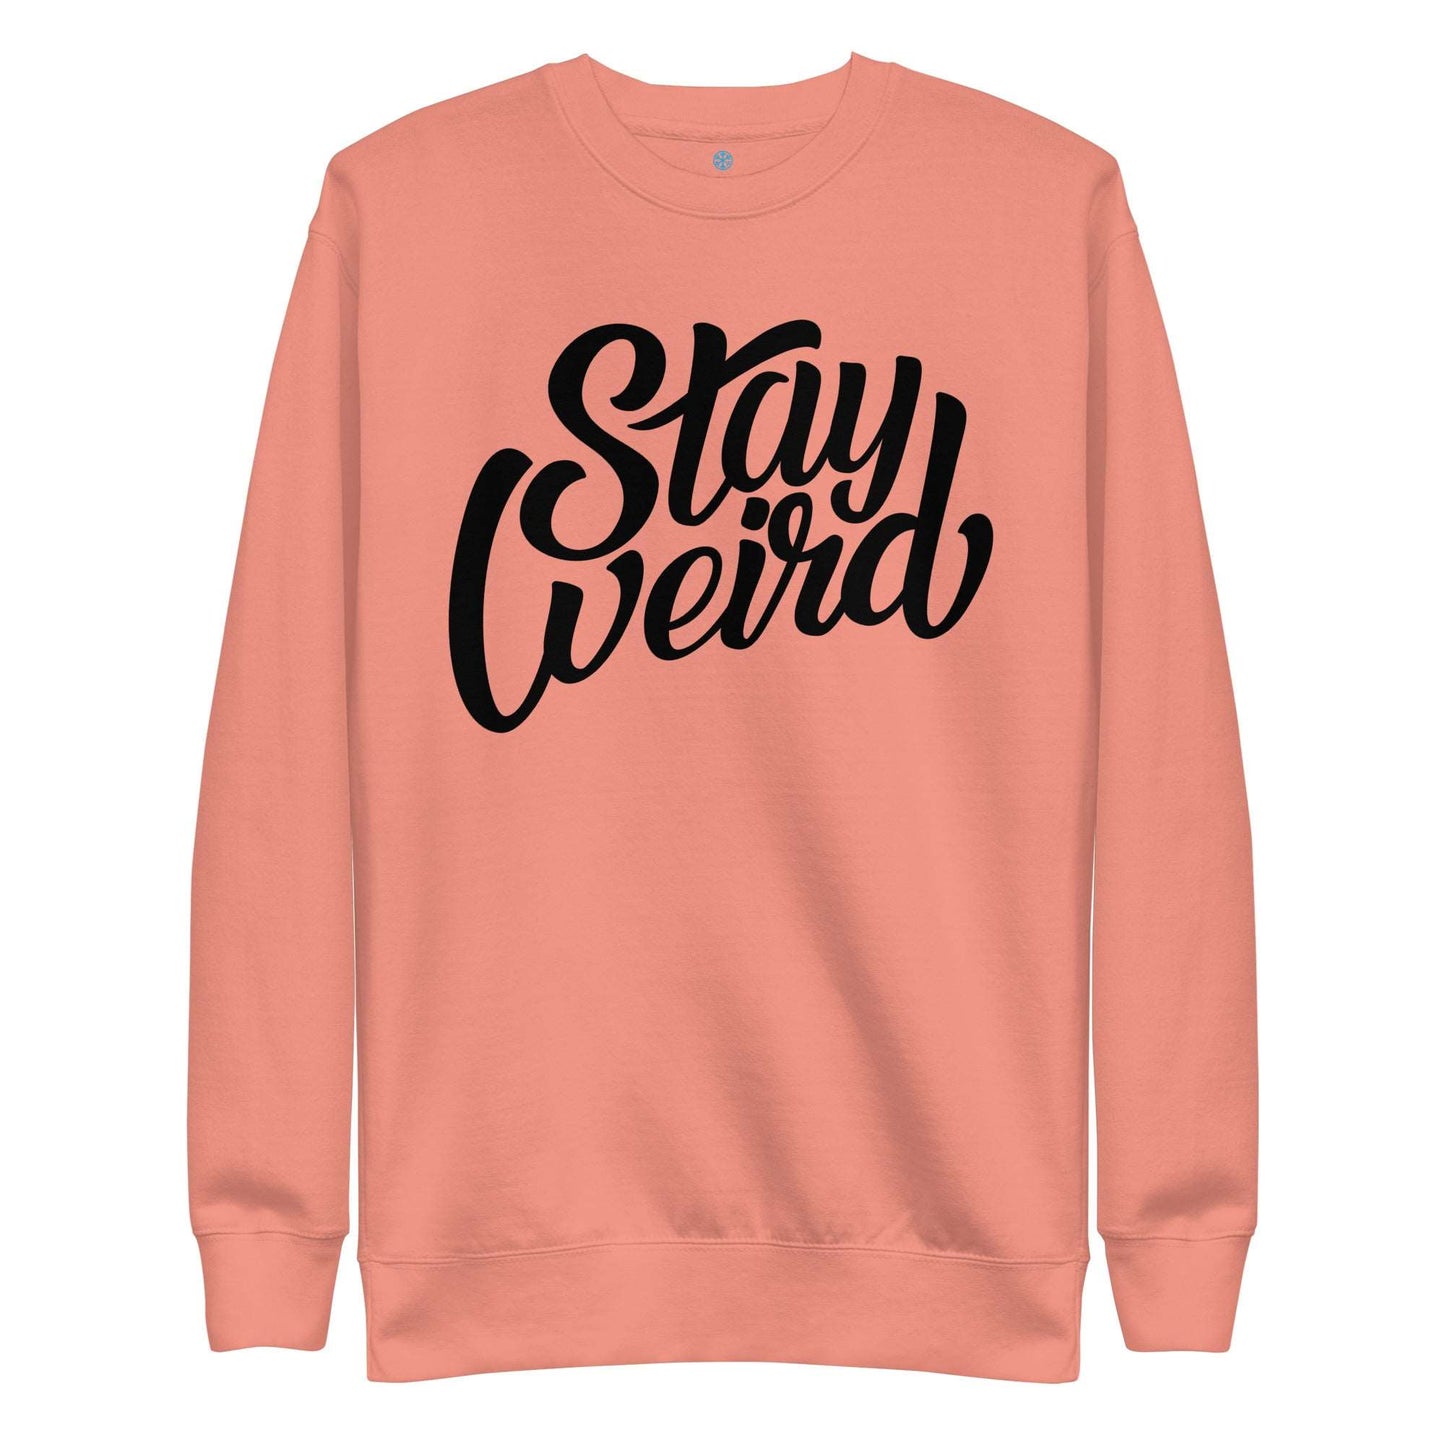 sweatshirt Stay Weird pink by B.Different Clothing independent streetwear brand inspired by street art graffiti